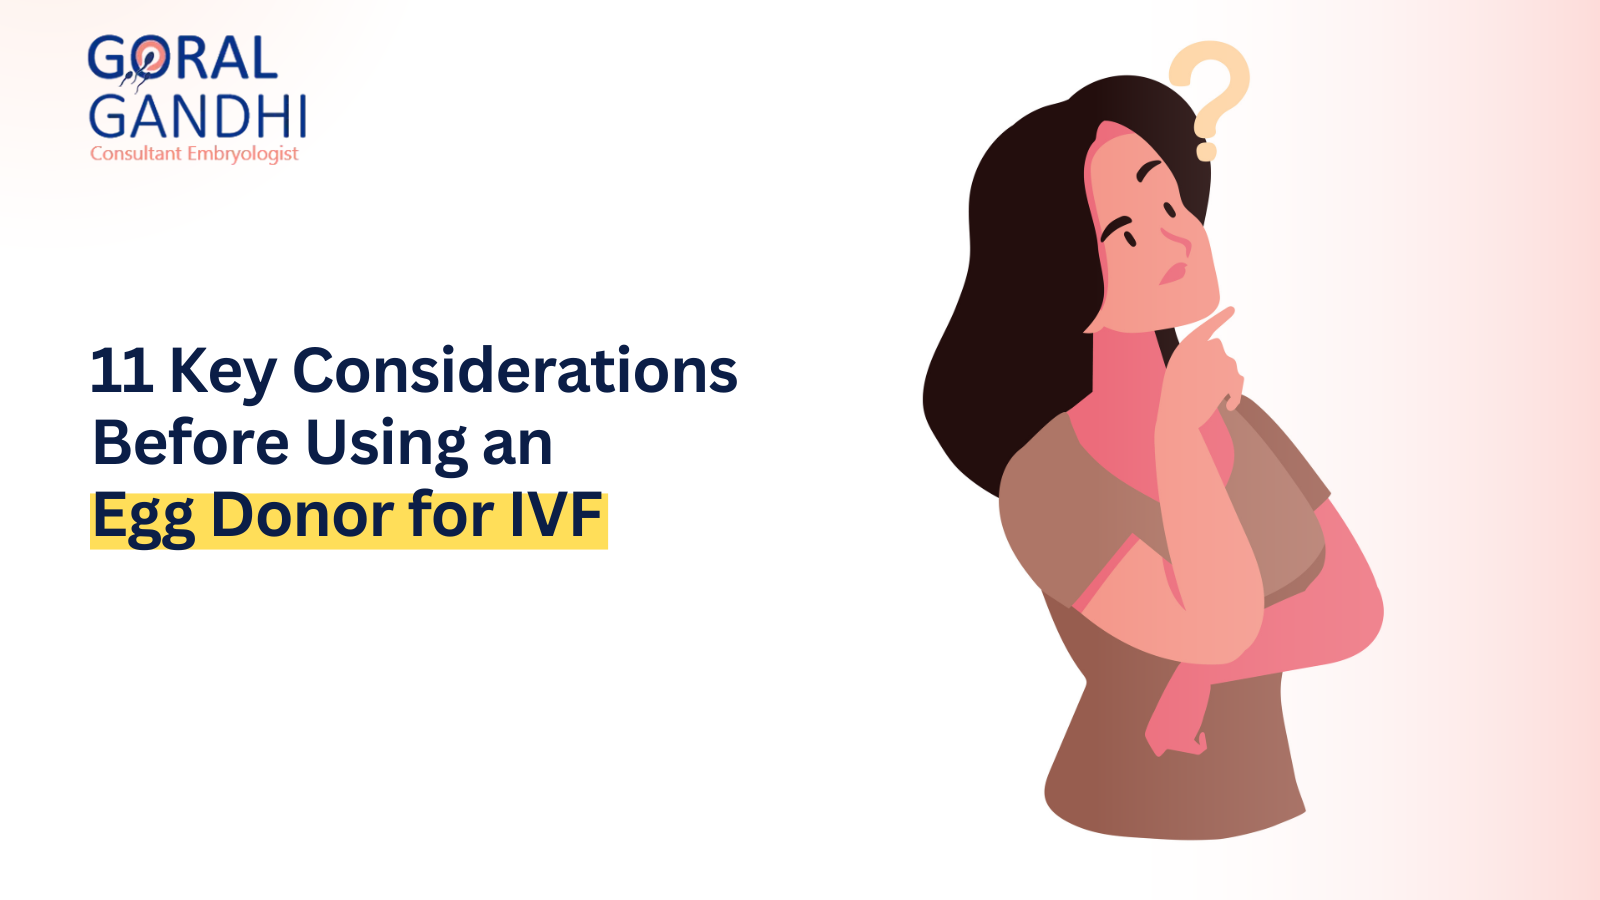 11 Key Considerations Before Using an Egg Donor for IVF